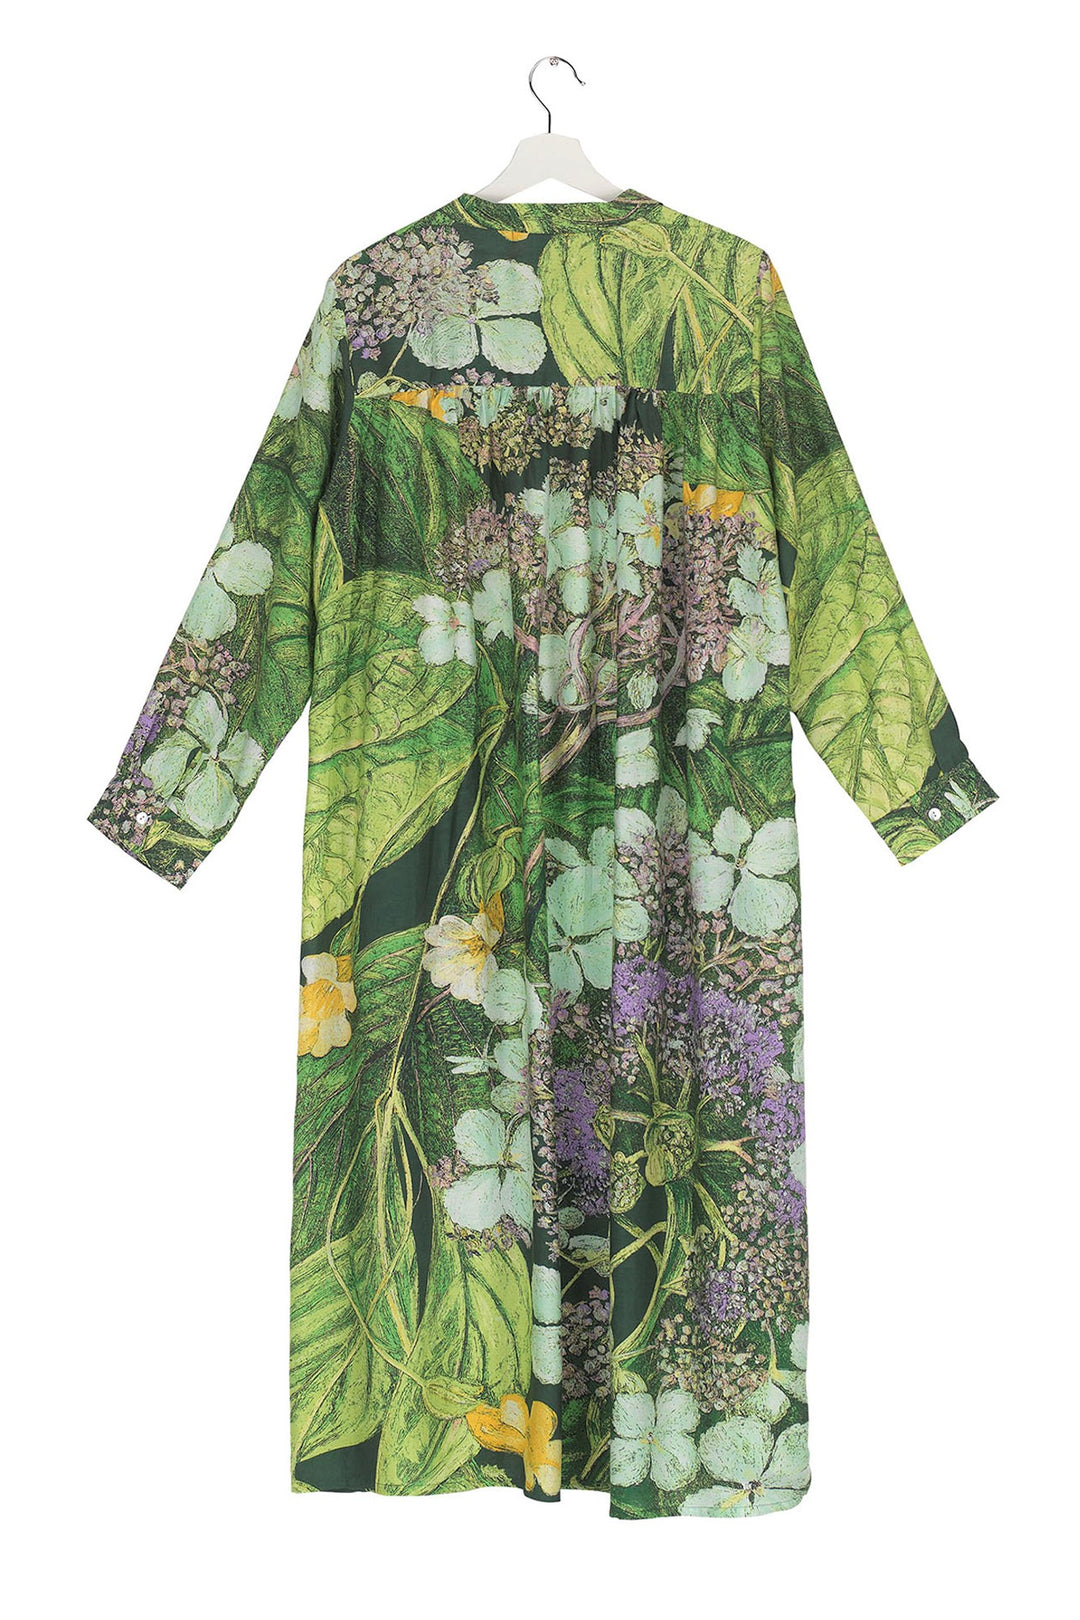 One Hundred Stars takes inspiration for the Marianne North Collection held at the Royal Botanic Gardens, Kew. Here is the Hydrangea hand screen printed duster coat